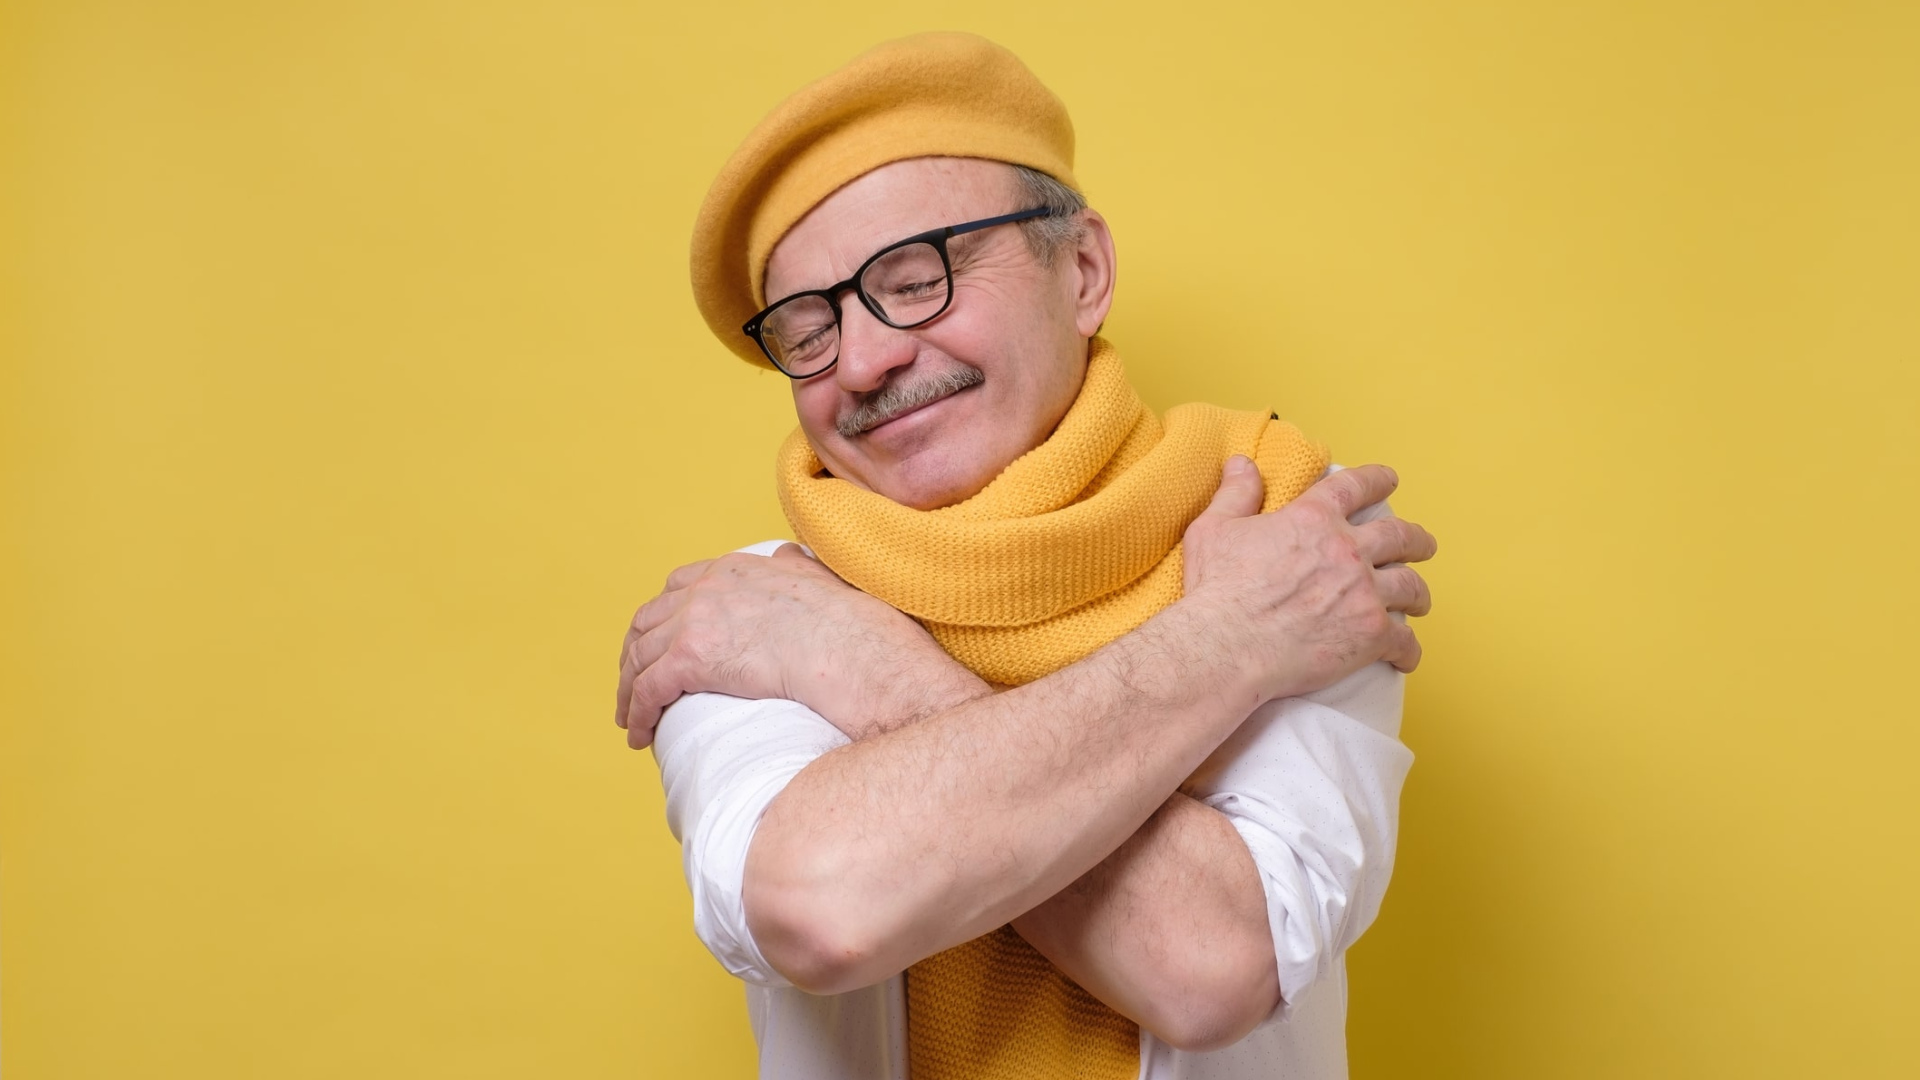 older man hugging himself happily wearing knitted hat and scarf